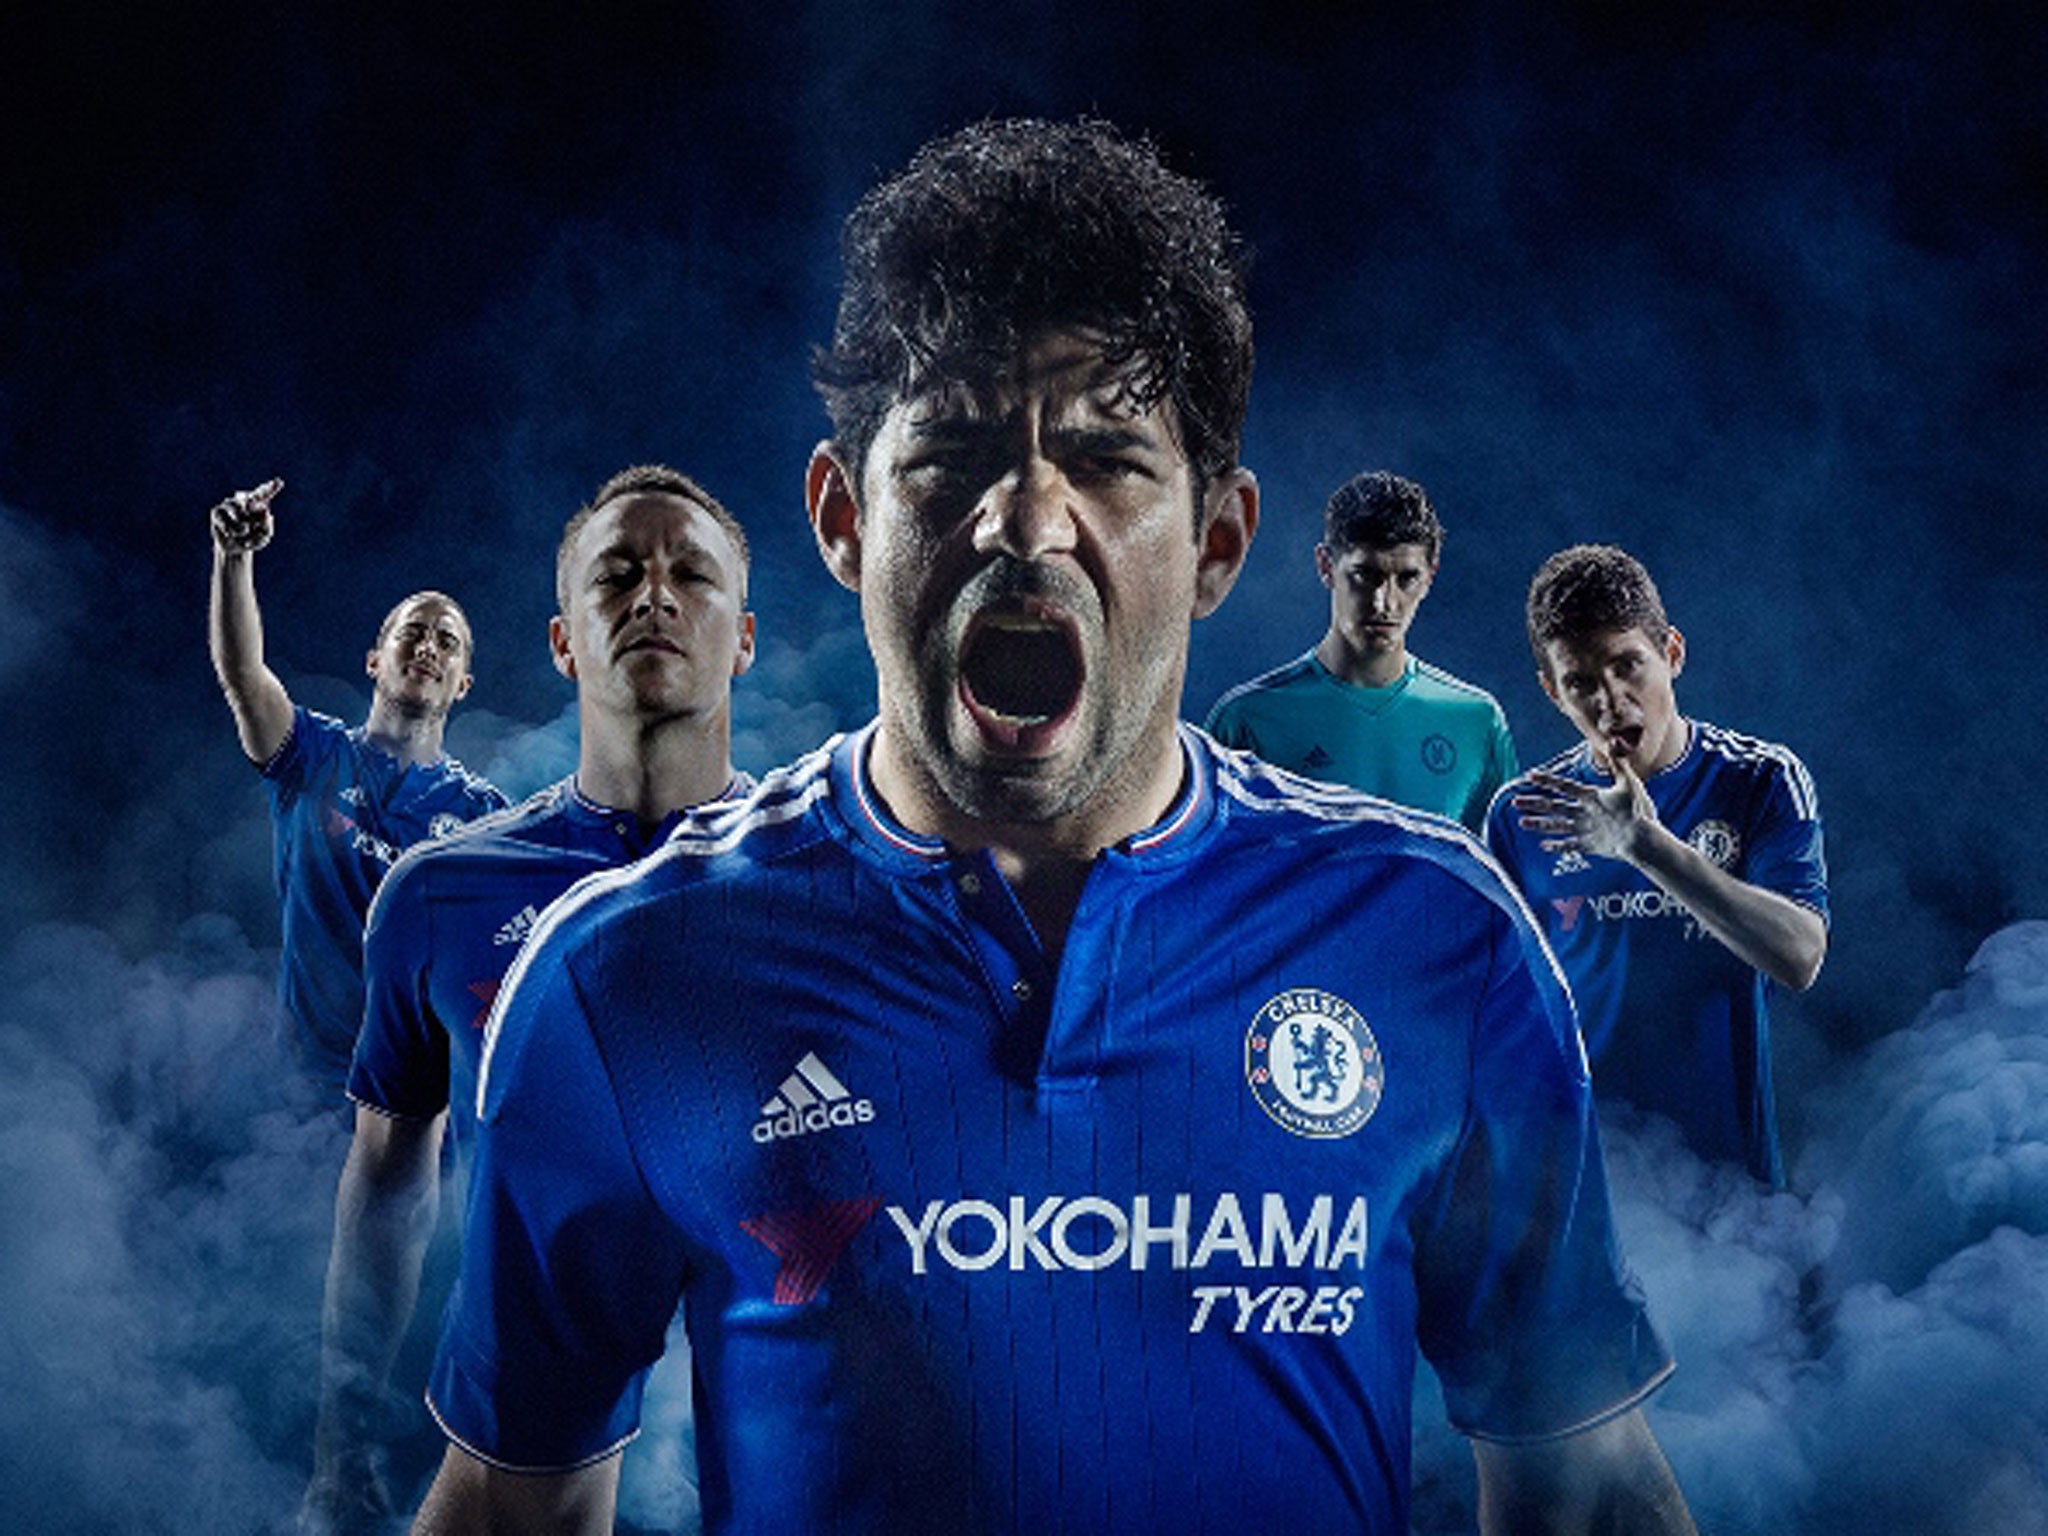 Chelsea 2015/16 kit launched: unveil new kit will be first worn during pre-season friendly against New York Red Bulls | The Independent | Independent